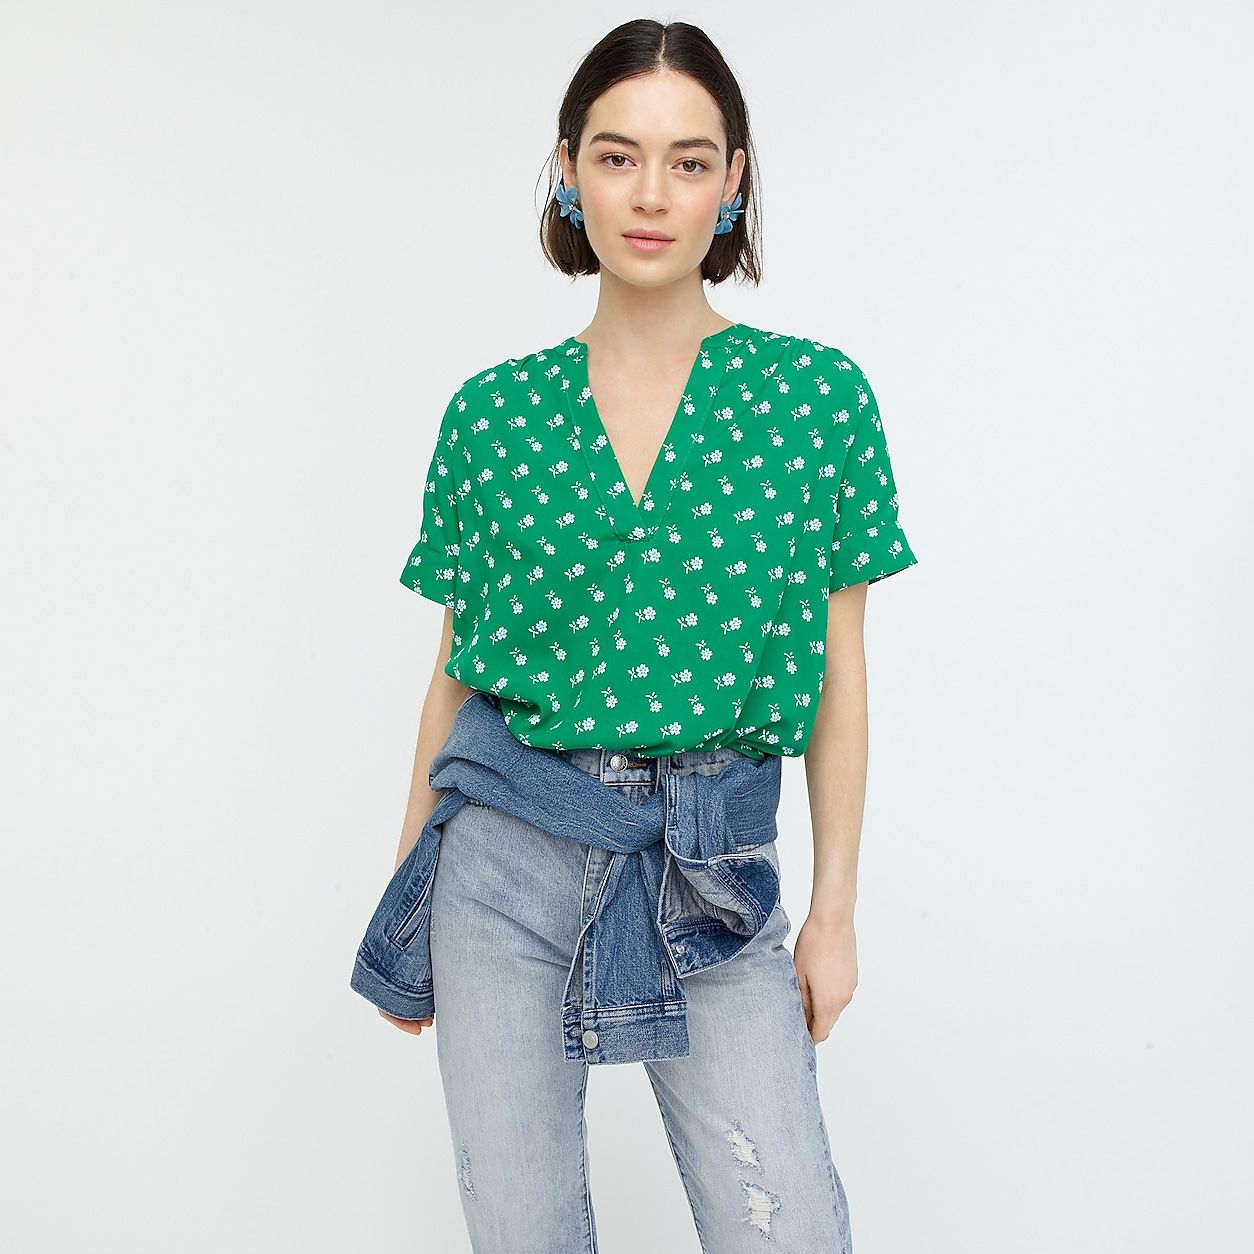 Drapey band-collar top in dainty floral | J.Crew US